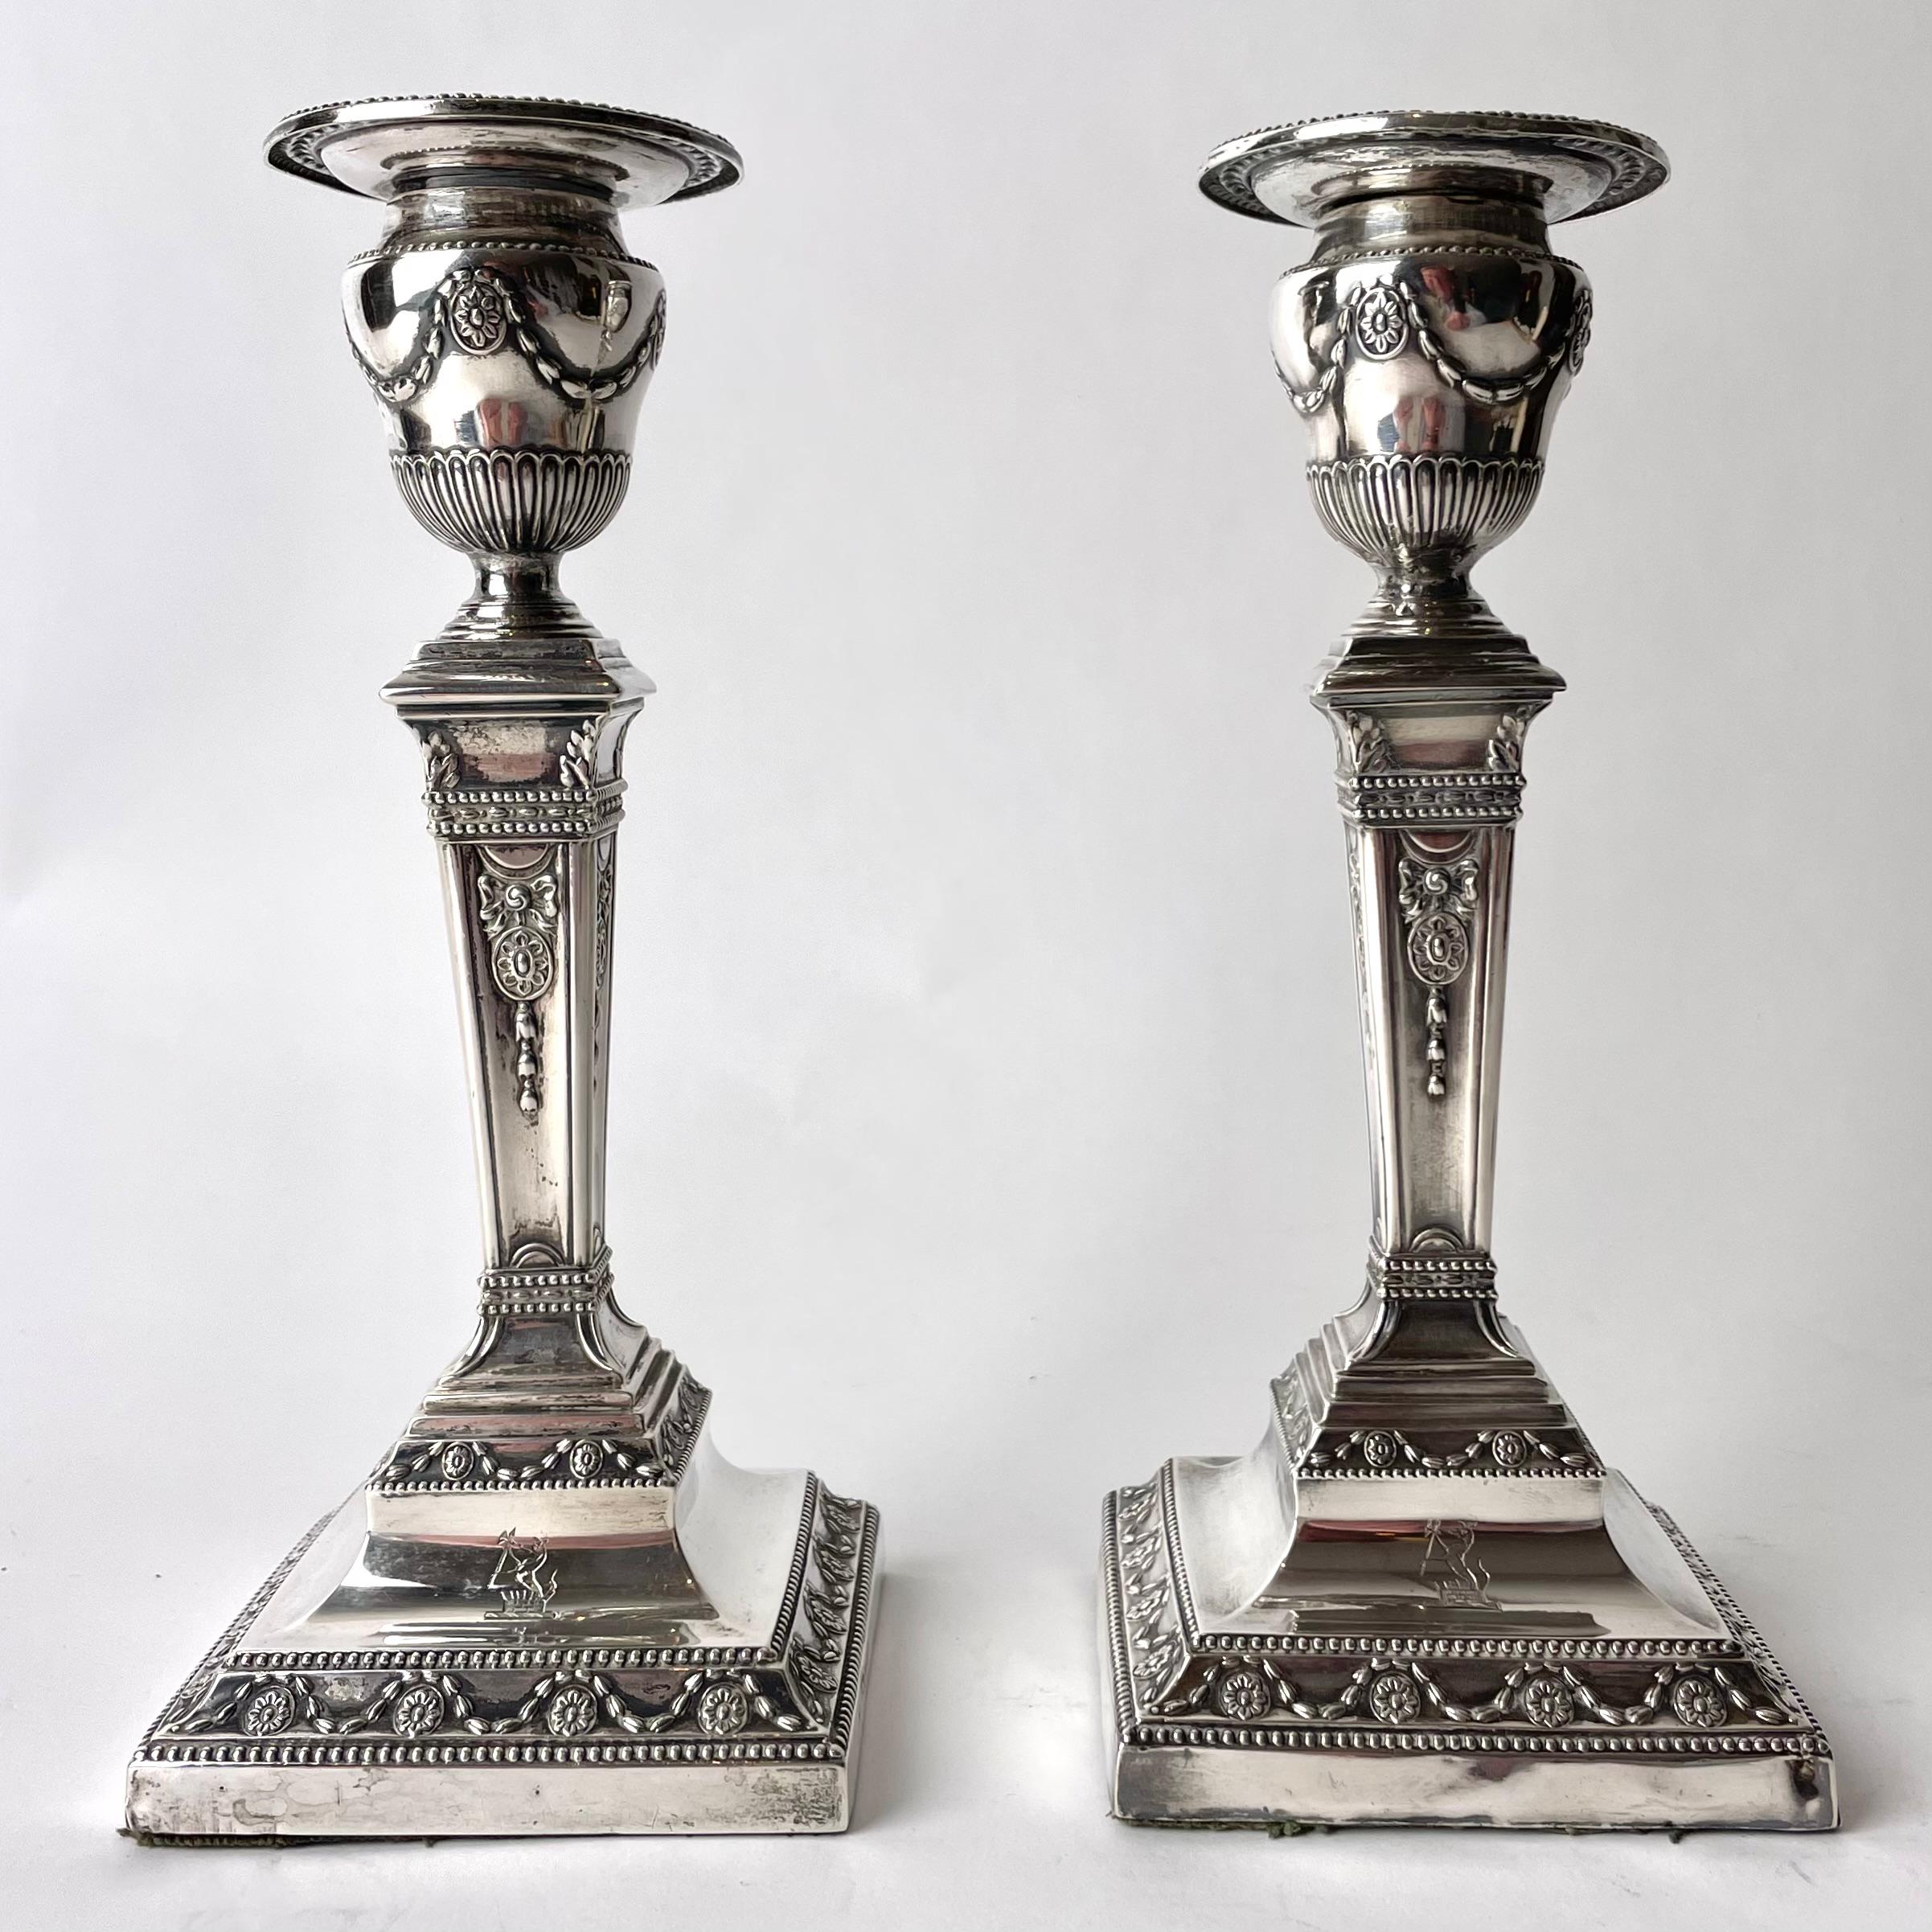 Pair of beautiful Silver Candlesticks hallmarked JB, London 1881. Minor dents at the bottom (see pictures) but rhe candlesticks are over 140 years old and the overall condition is good.

Wear consistent with age and use 